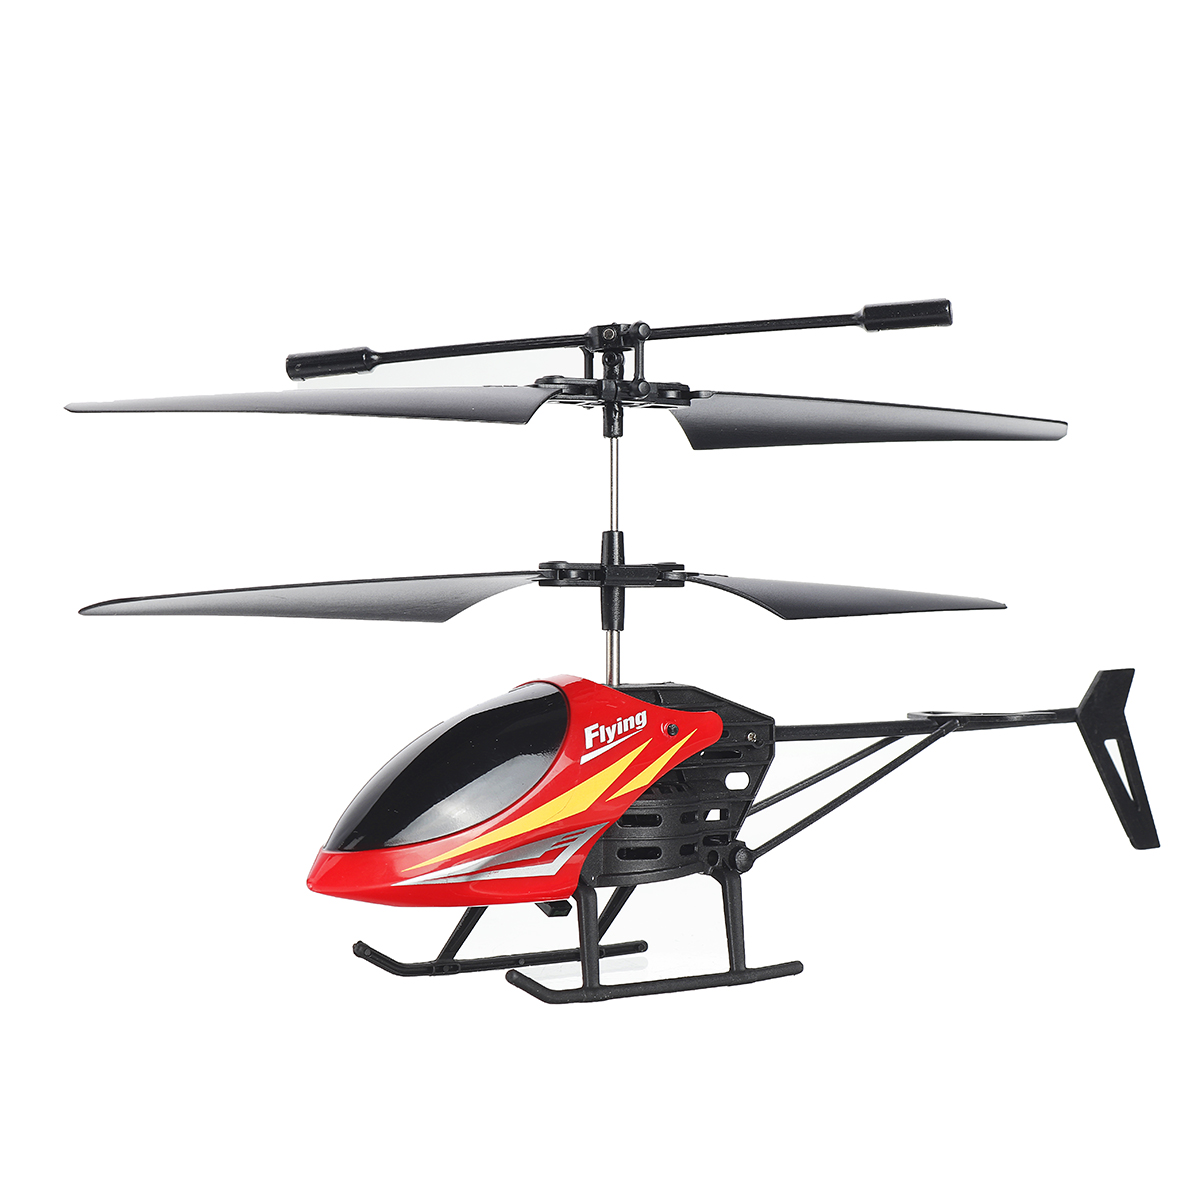 JJRC-SY003AB-35CH-Mini-Infrared-Remote-Control-Helicopter-for-Children-Outdoor-Toys-1757928-4